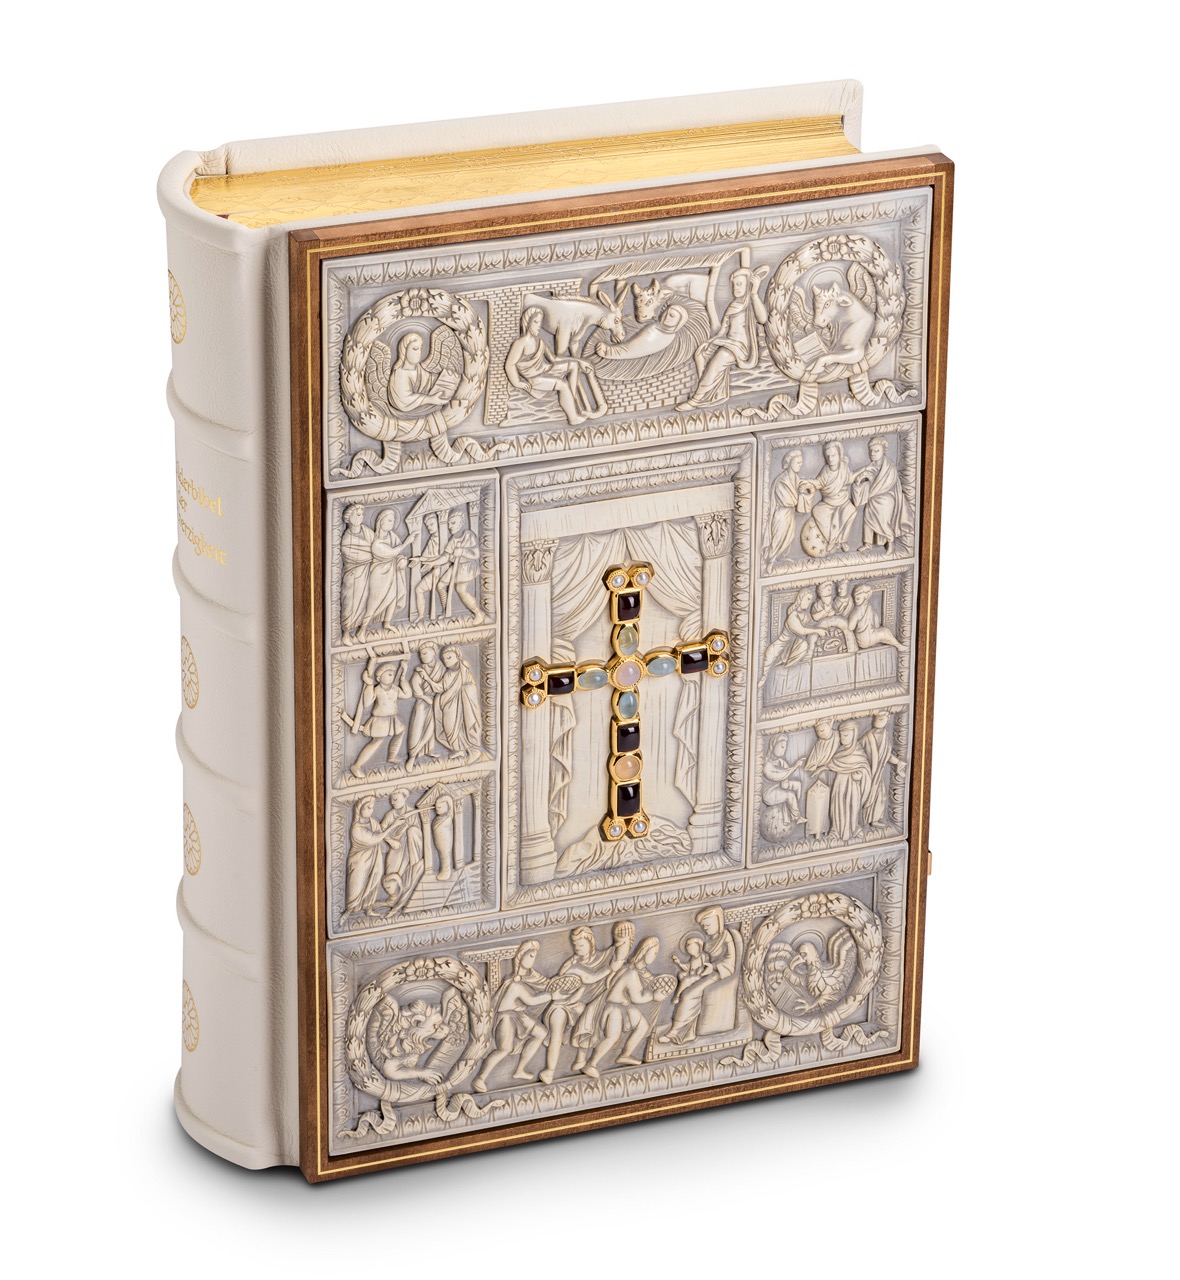 Bible on display: Binding with ivory replicas in a fine wooden frame. In the centre of the cover is a magnificent cross set with precious stones in real gold plating. Two genuine gold-plated polished clasps round off this masterpiece.